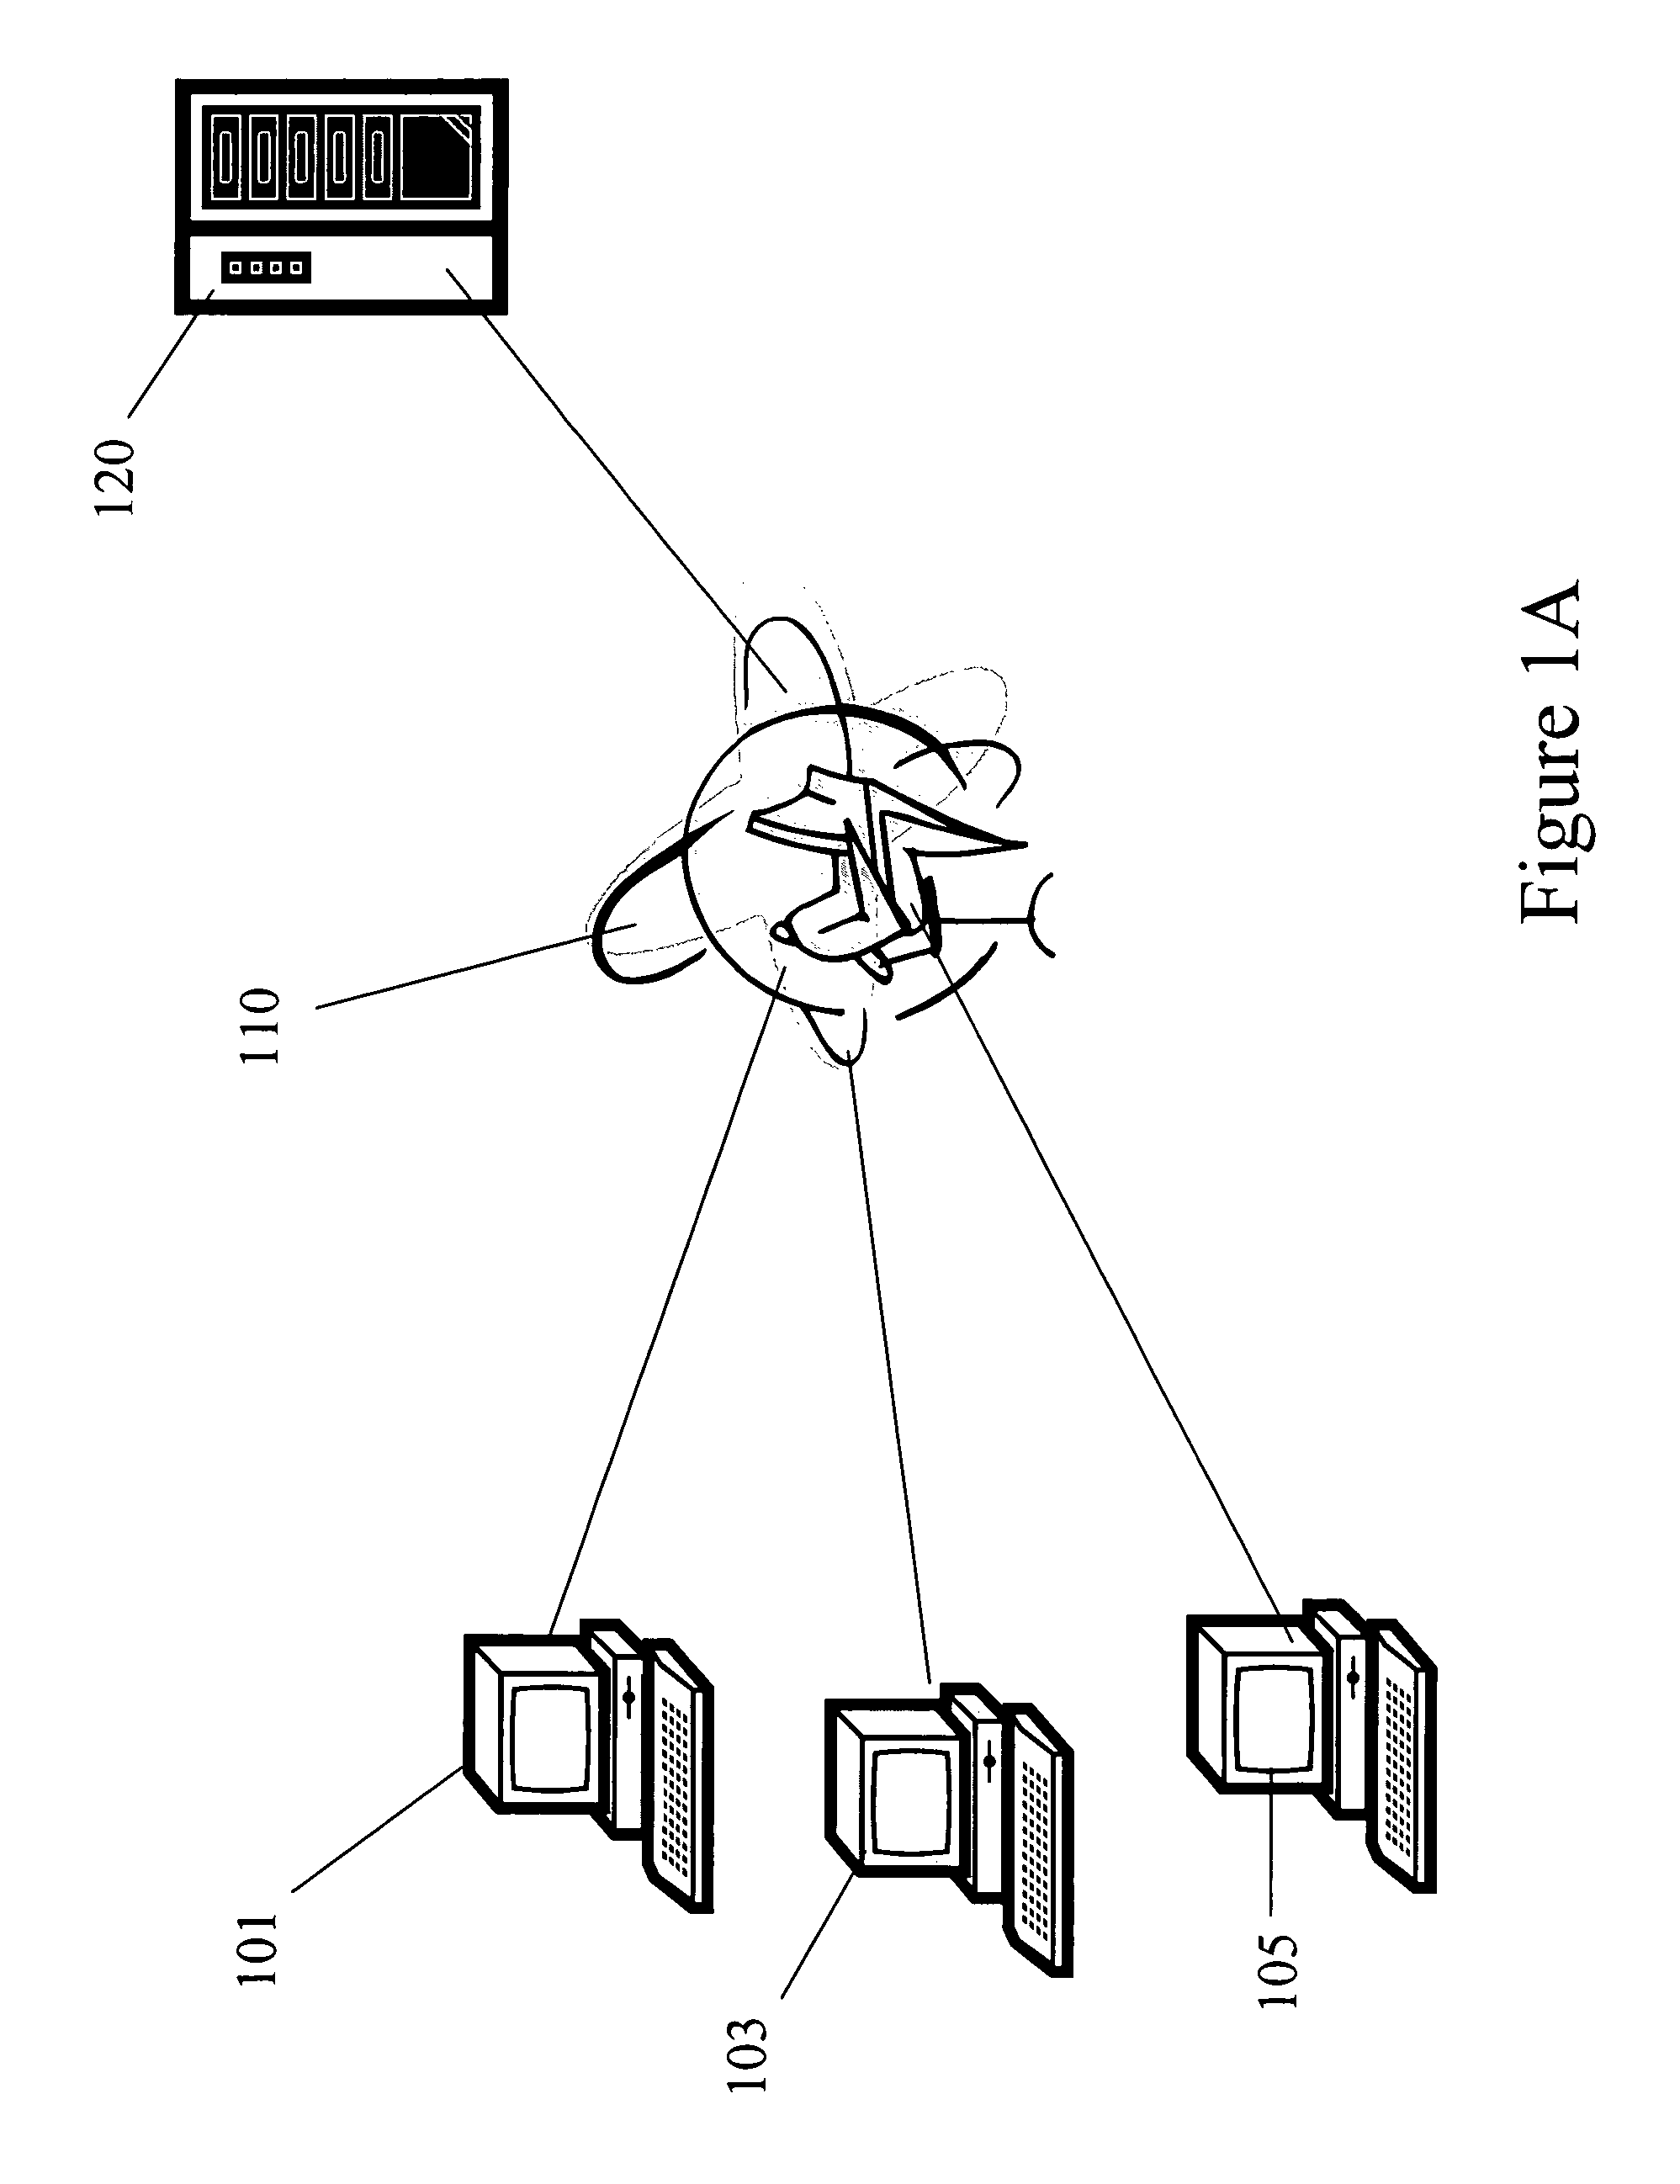 Systems and methods for providing and installing software